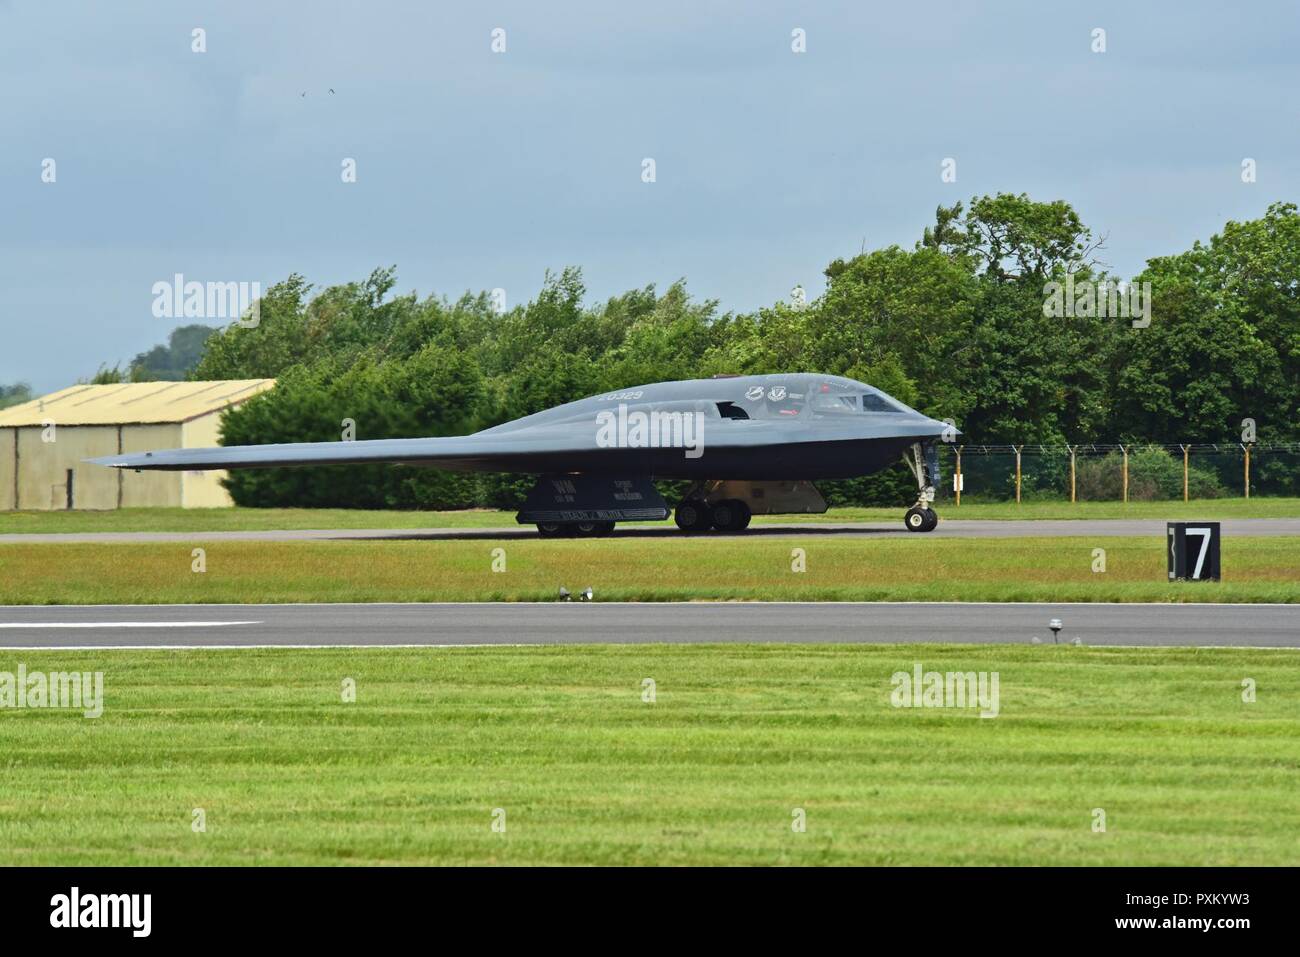 A B-2 Spirt deployed from Whiteman Air Force Base, Mo., approaches the runway at RAF Fairford, U.K., June 9, 2017. The B-2 routinely conducts bomber assurance and deterrence missions providing a flexible and vigilant long-range global strike capability, and is just one demonstration of the U.S. commitment to supporting global security. Stock Photo